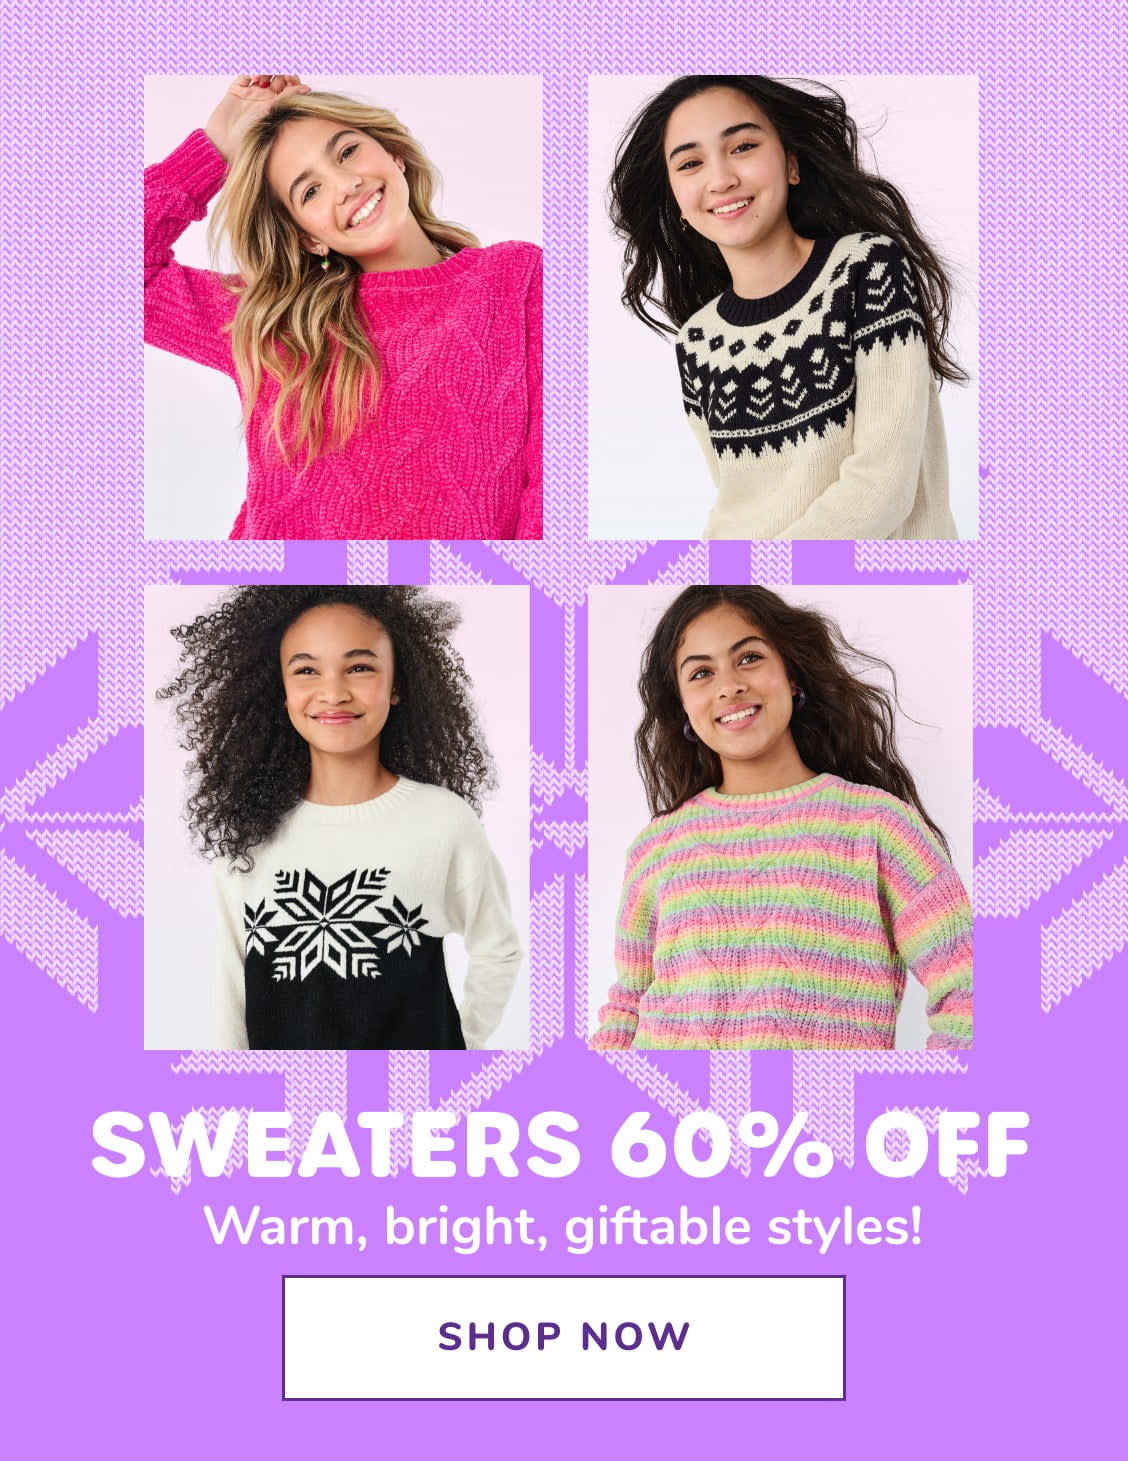 SWEATERS 60% OFF | Warm, bright, giftable styles!